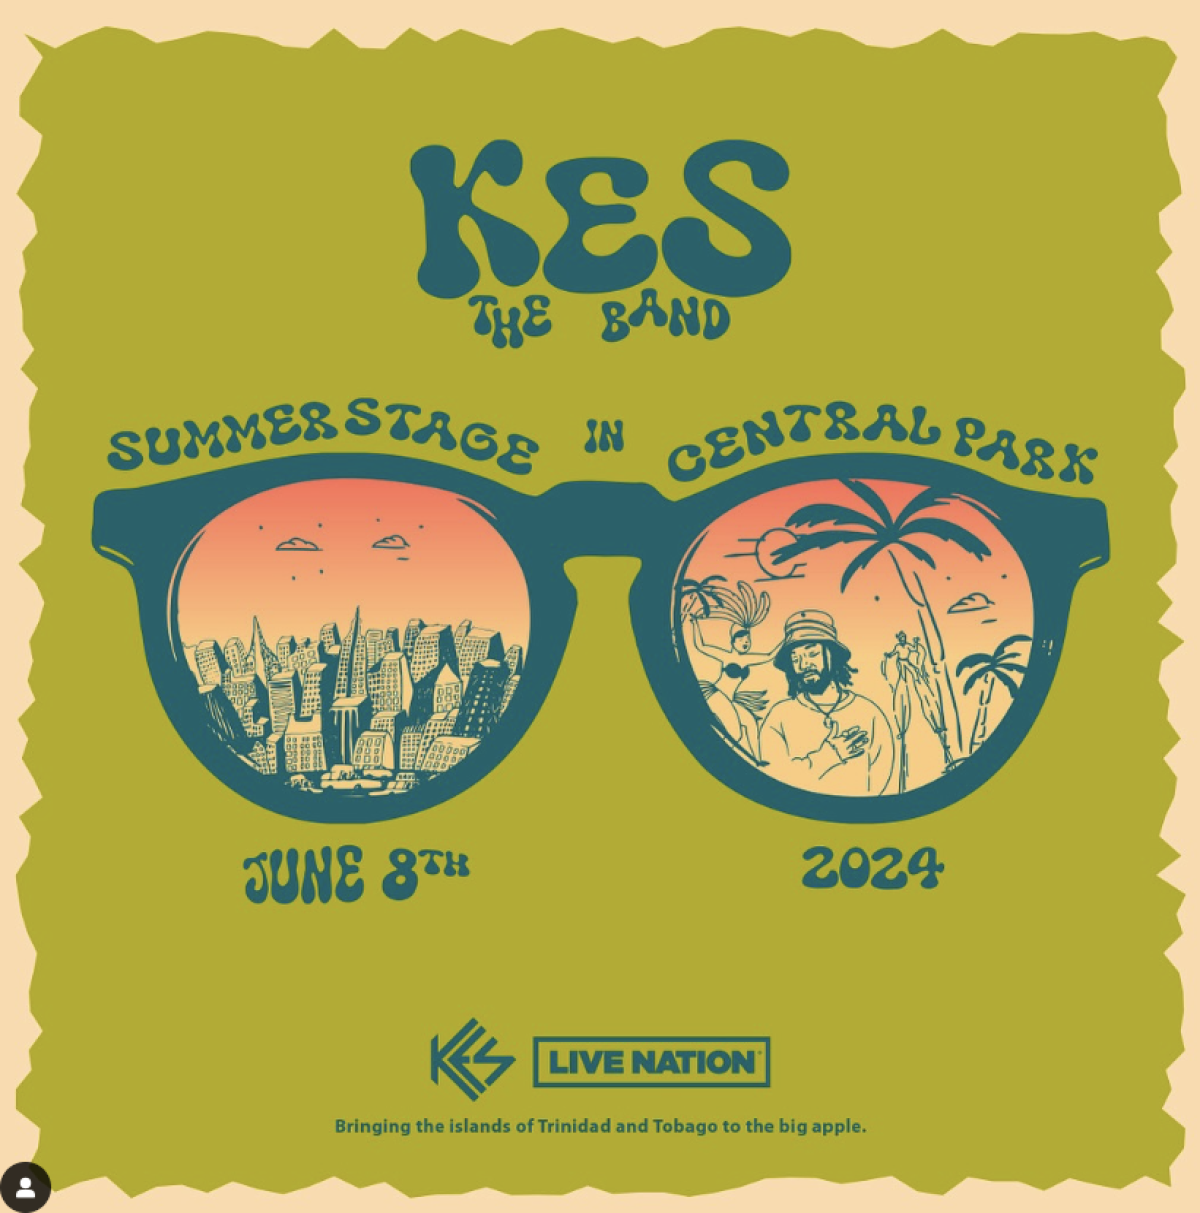 Kes The Band Summer Stage flyer or graphic.